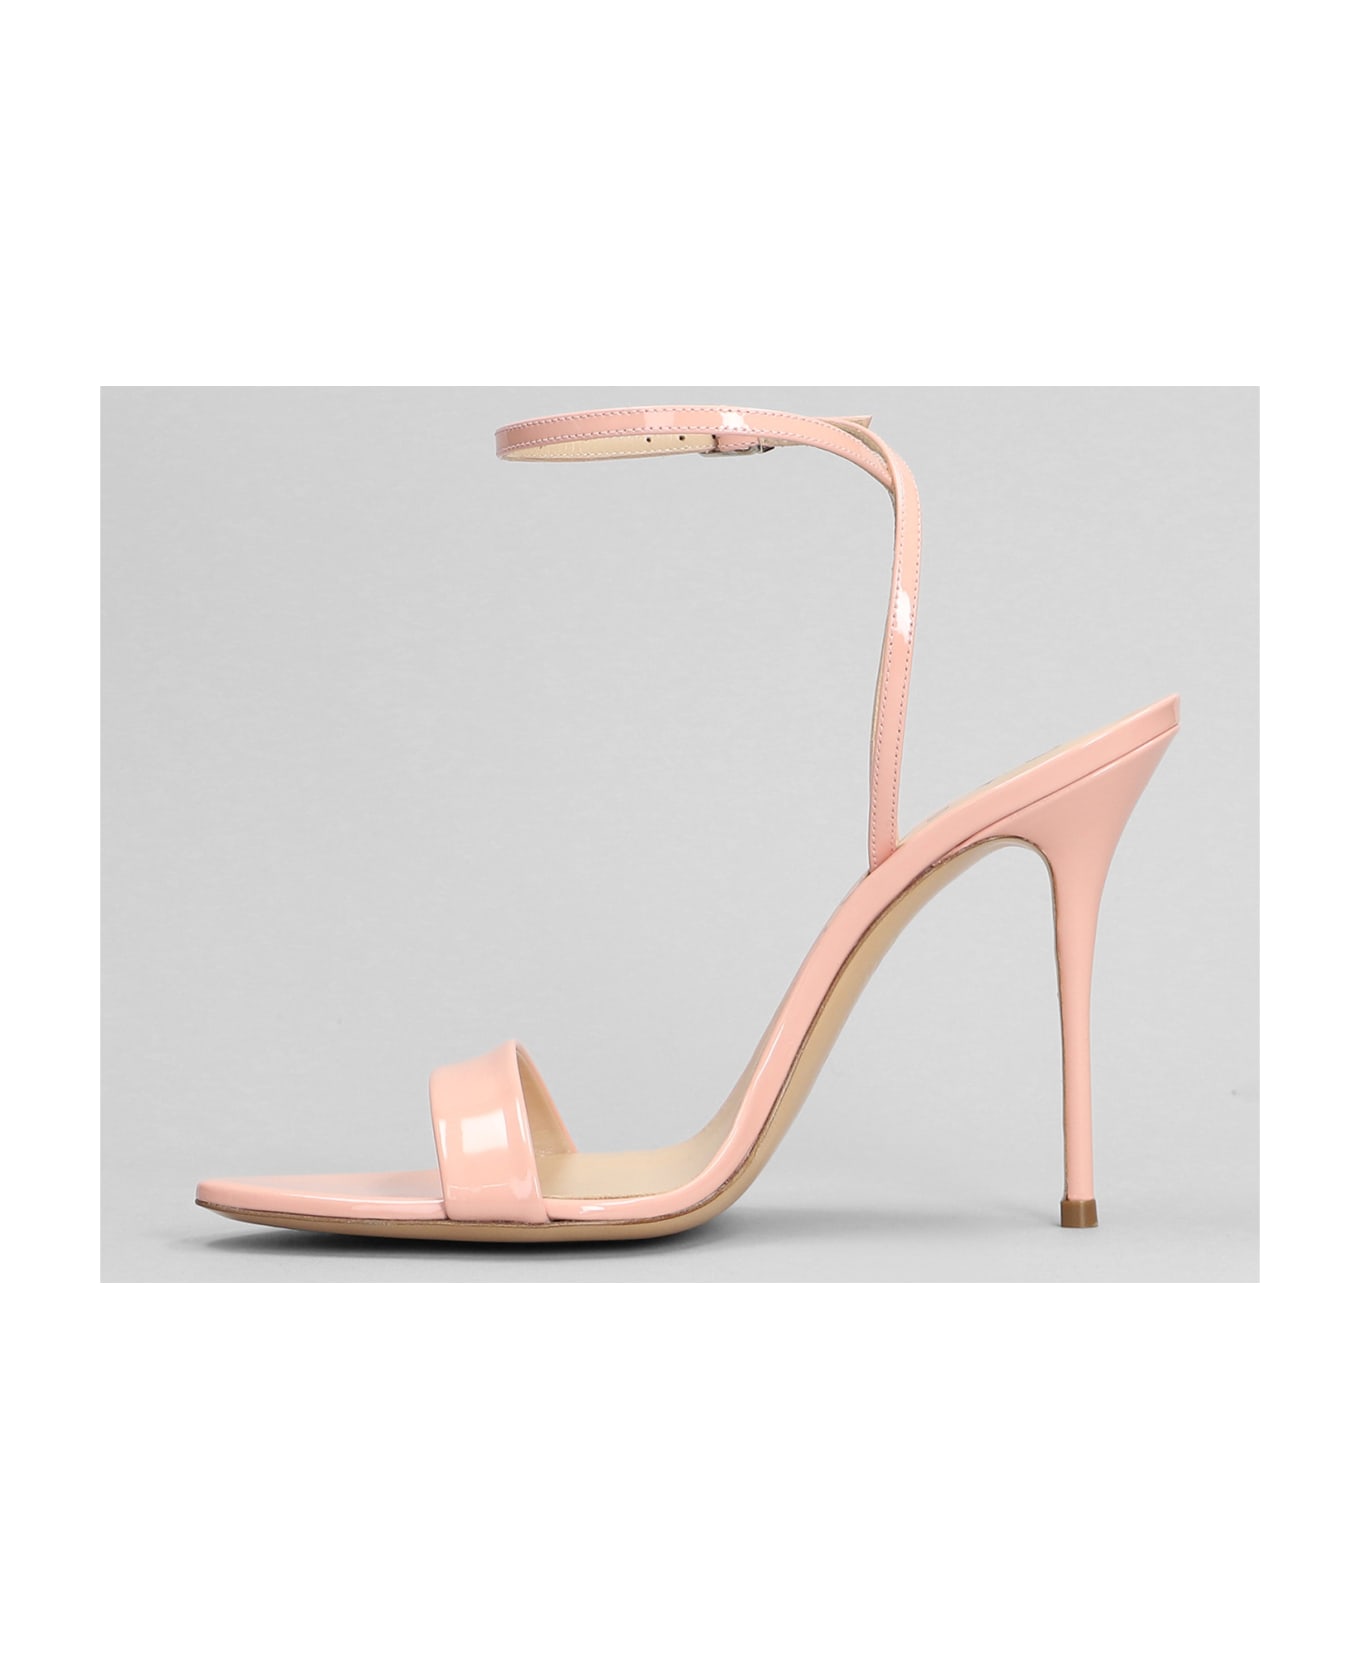 Casadei Scarlet Sandals In Rose-pink Patent Leather - rose-pink